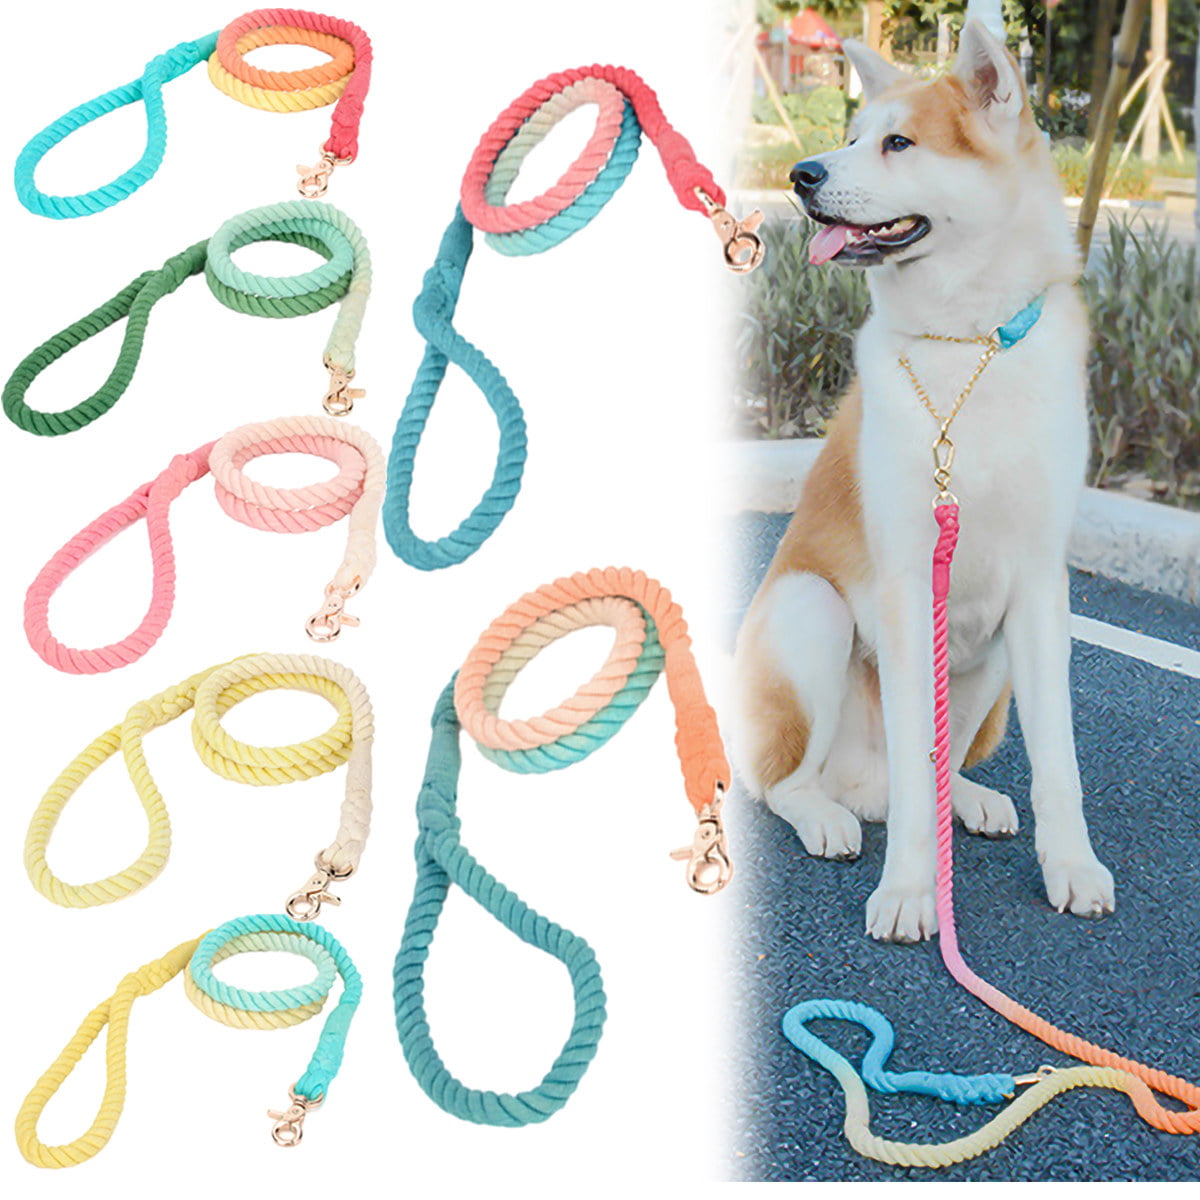 New Large Dog Strong Lead Leash Pet Adjustable Braid Traction Rope Safe Collars